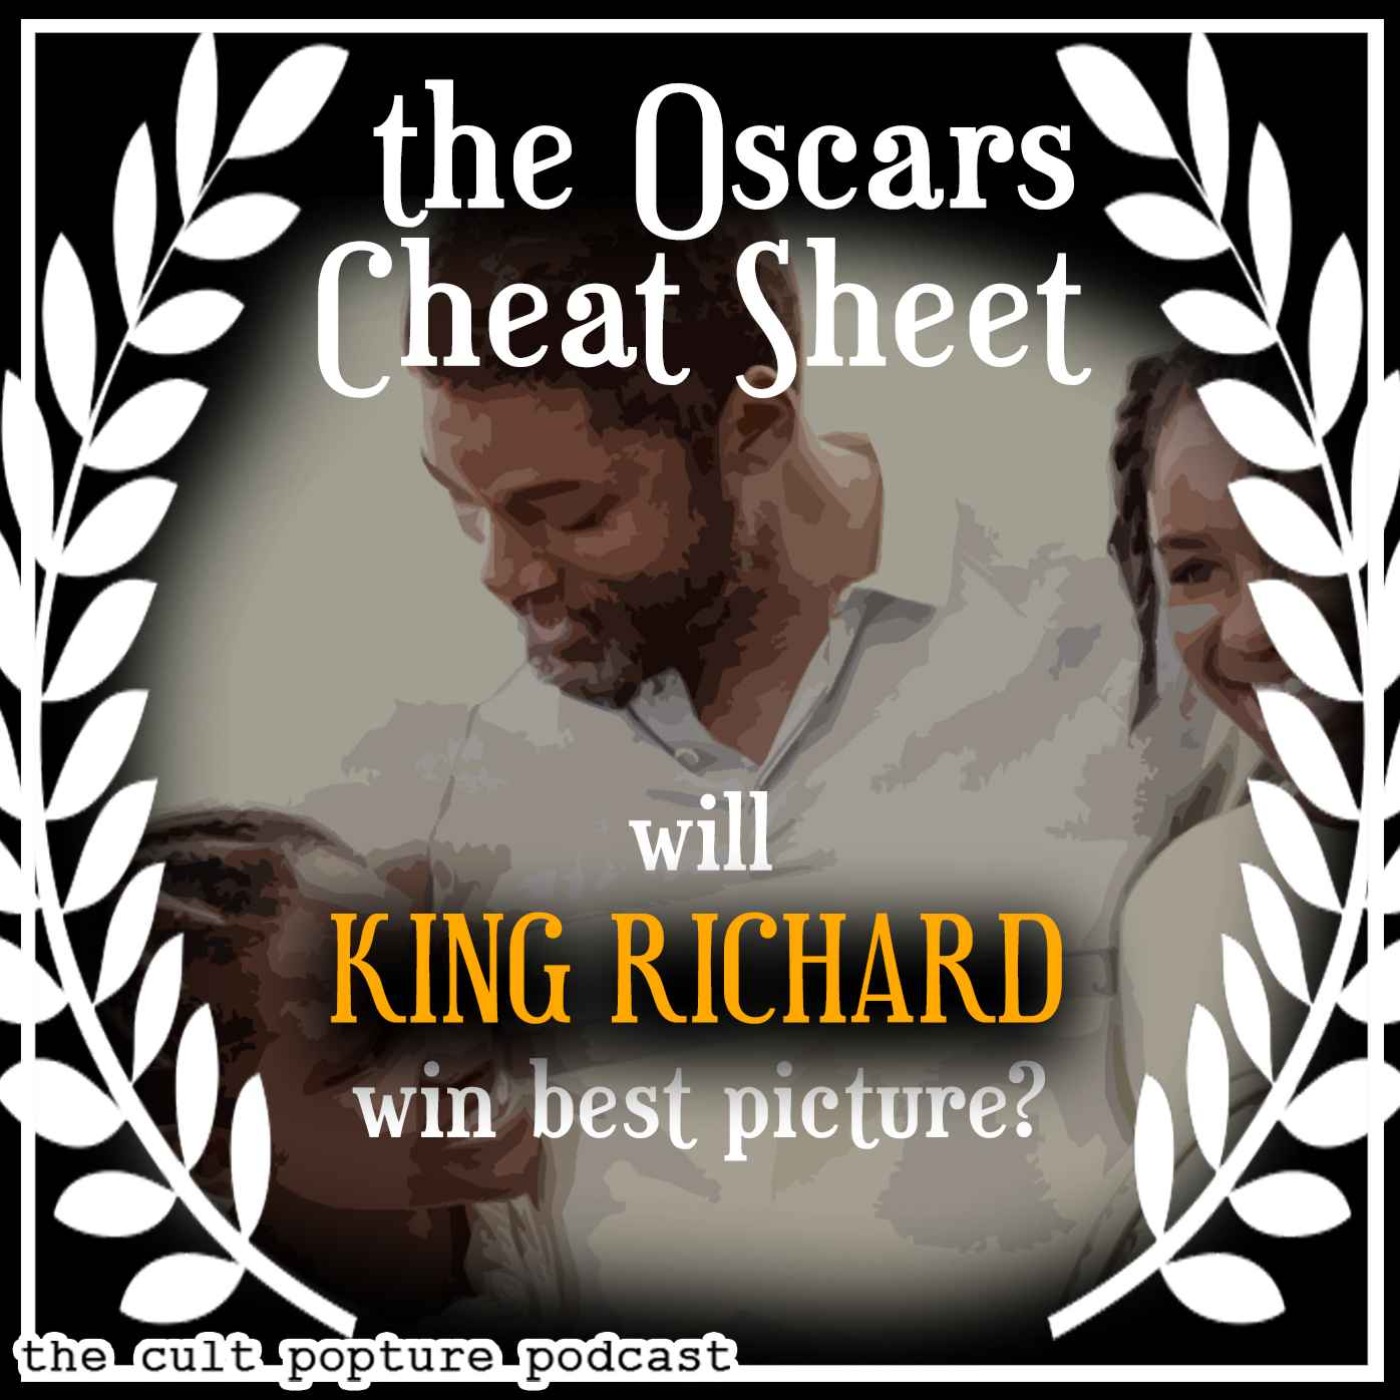 Will KING RICHARD Win Best Picture? | The Oscars Cheat Sheet